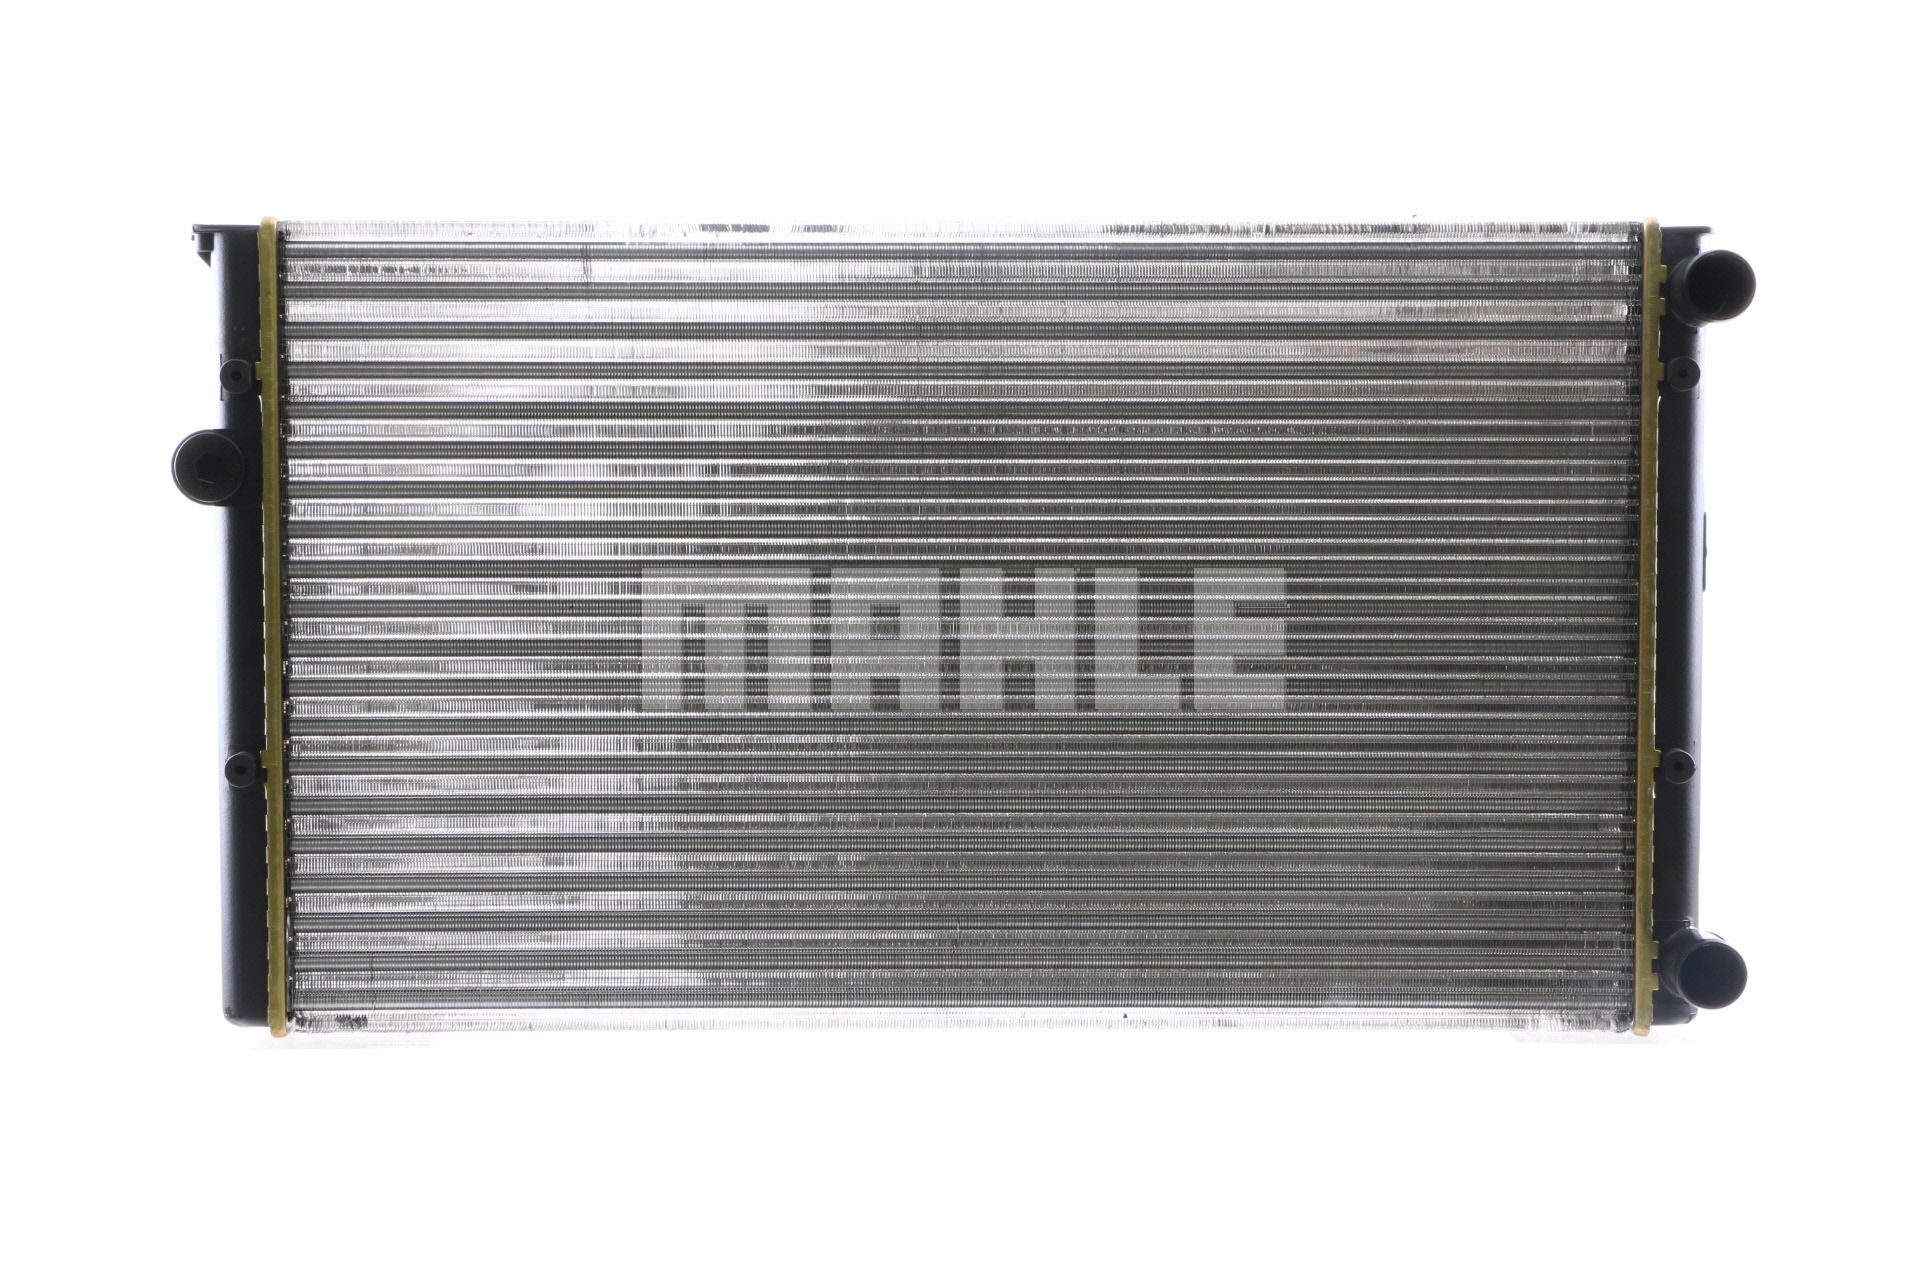 MAHLE ORIGINAL CR 373 000S Engine radiator for vehicles with air conditioning, 628 x 378 x 34 mm, Automatic Transmission, Manual Transmission, Mechanically jointed cooling fins